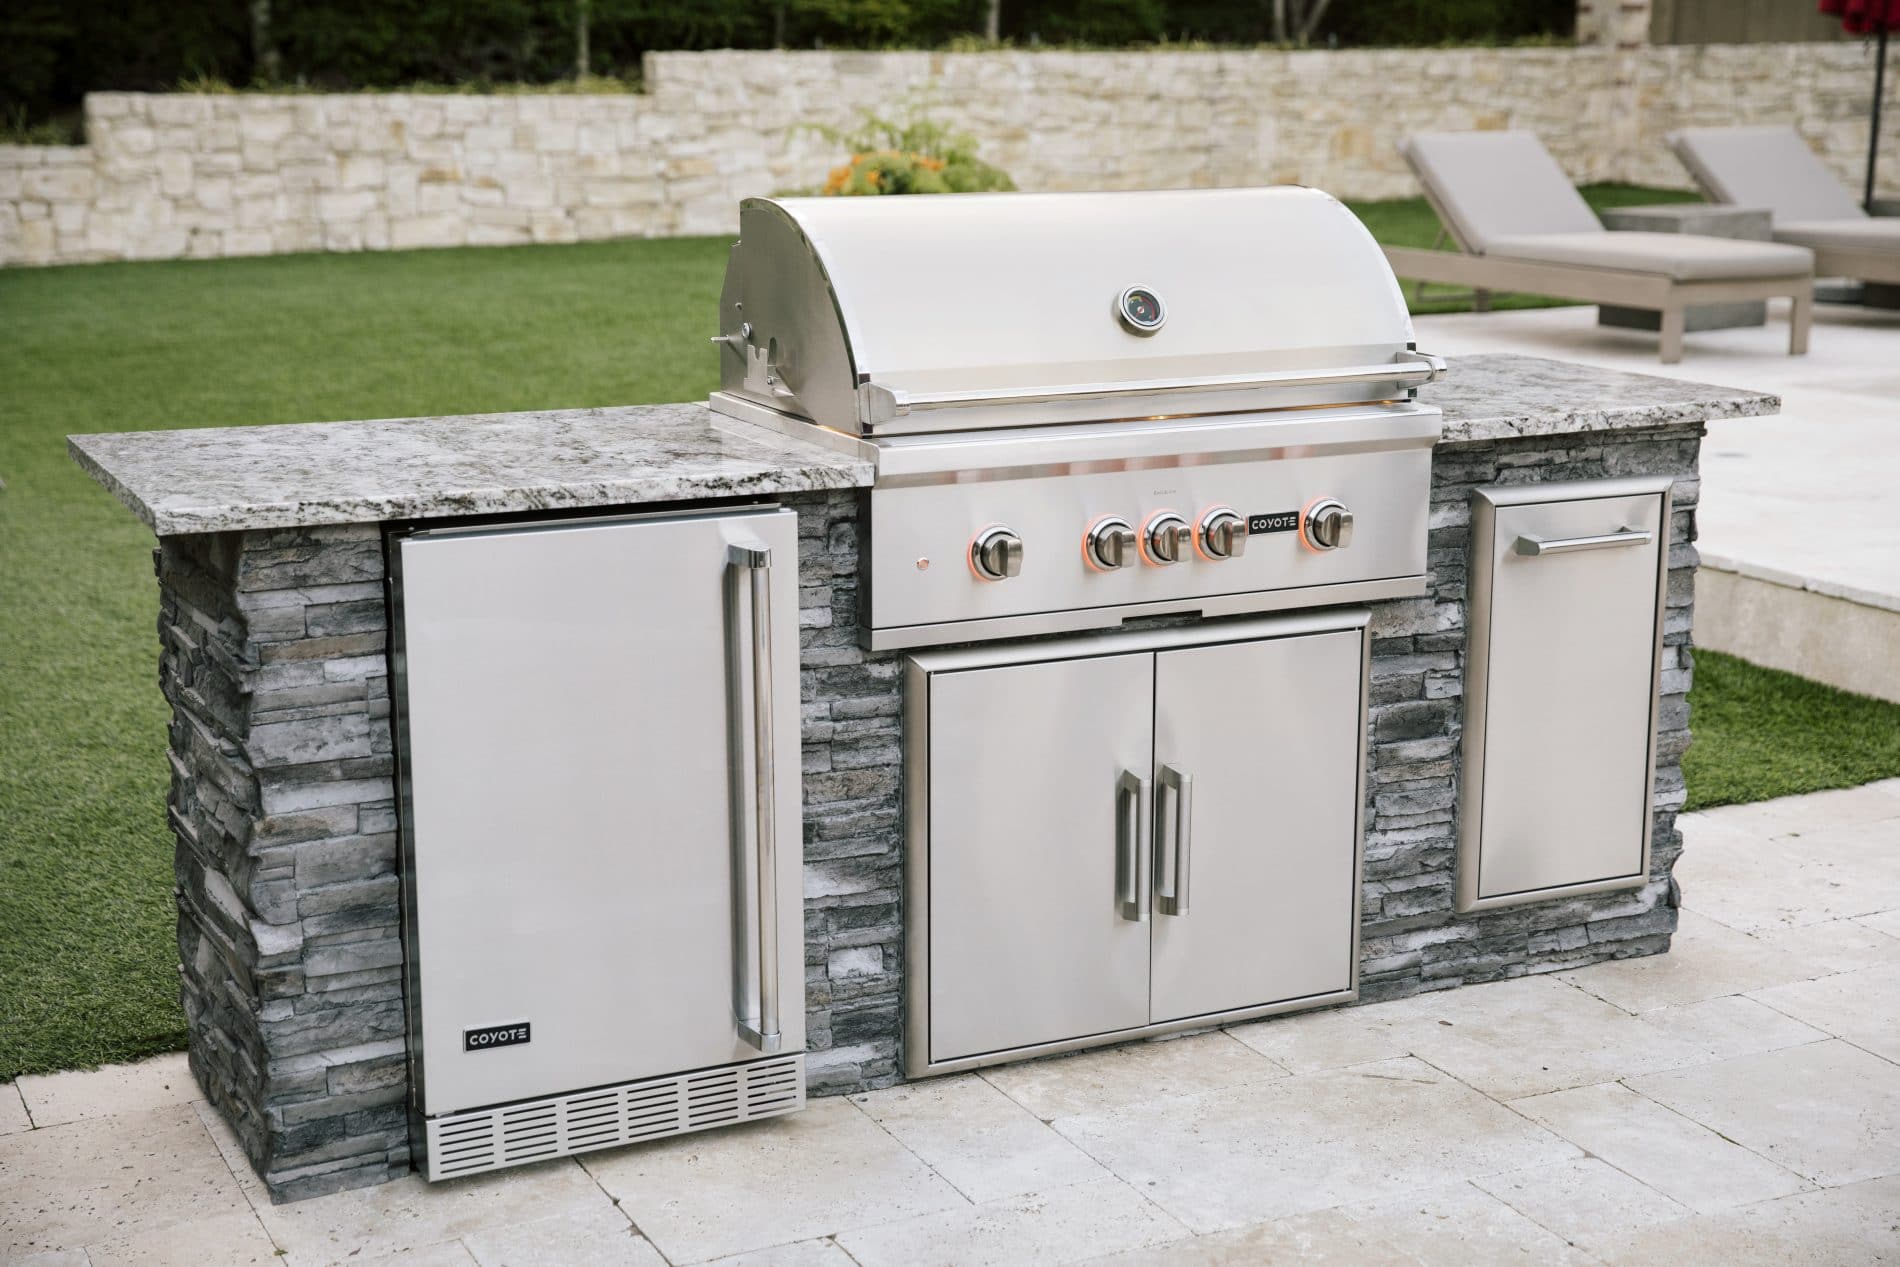 Create Outdoor Kitchen Designs in 18 Easy Steps   Coyote Outdoor Living